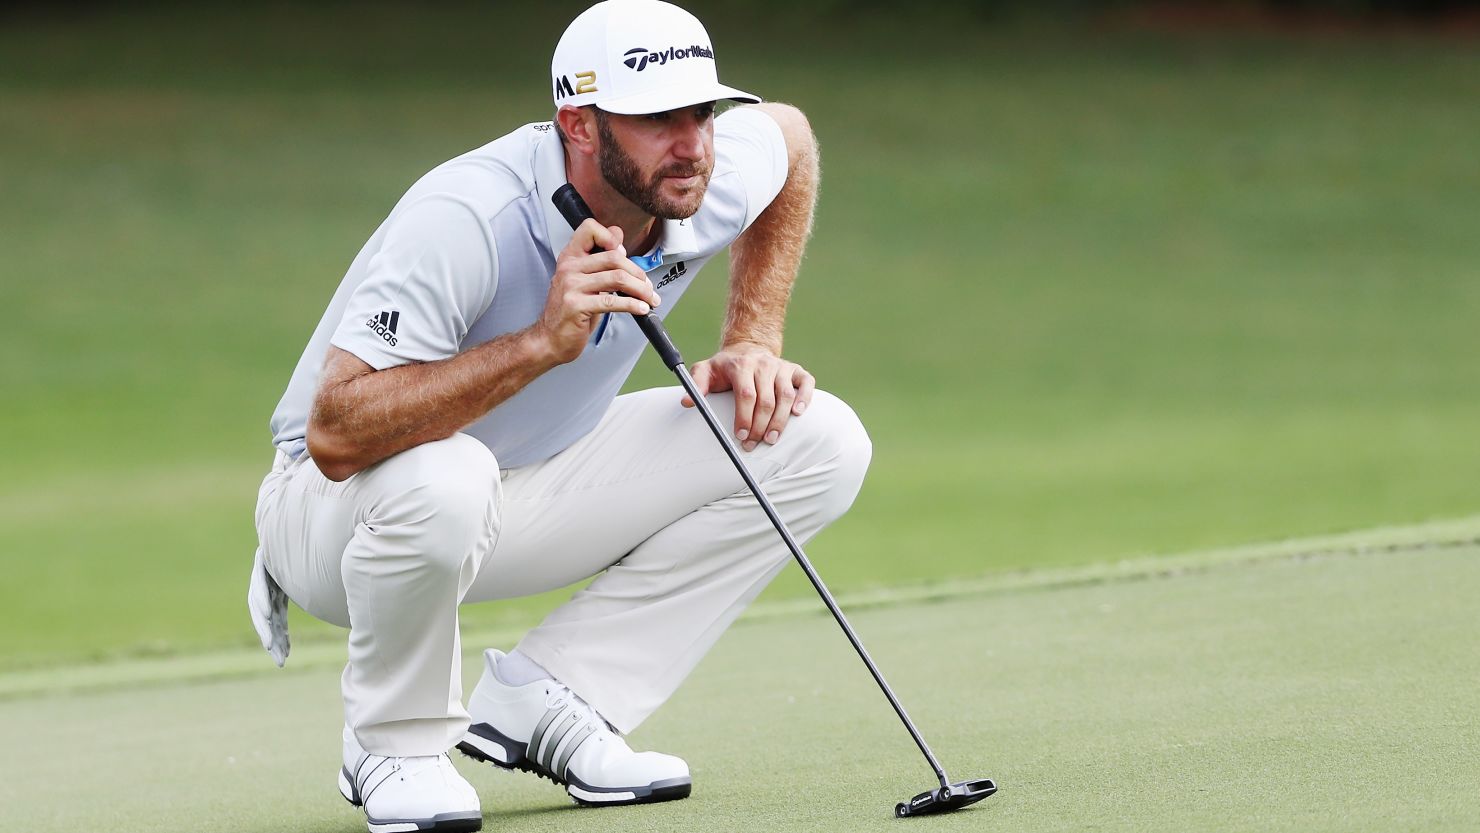 Eyes on the prize: Dustin Johnson lines up a putt at the Tour Championship Thursday.